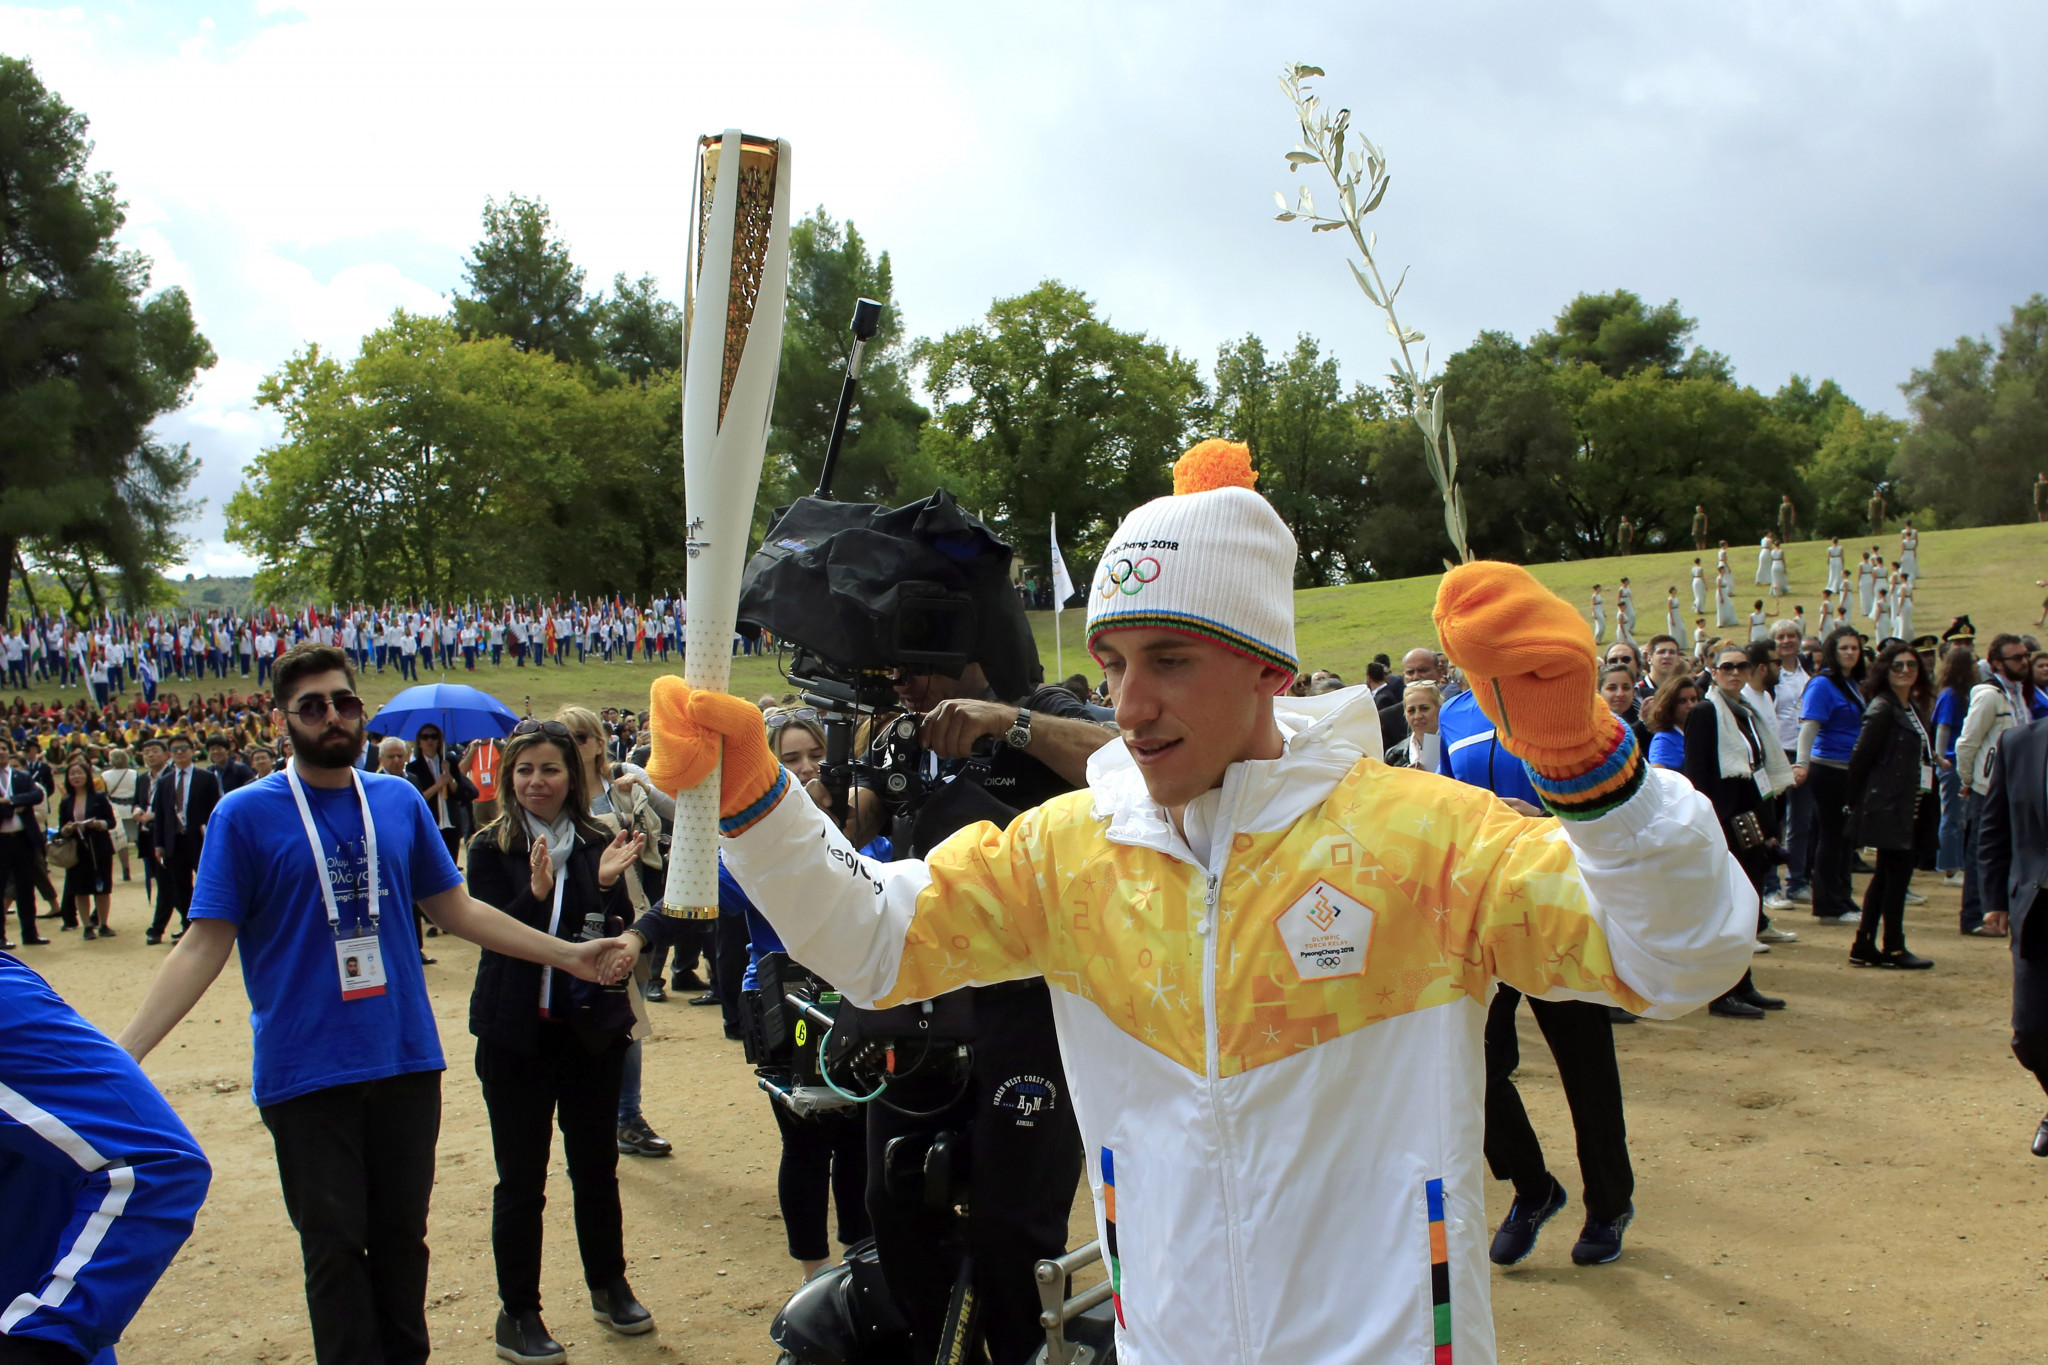 Greek cross-country skier Apostolos Angelis was the first Torchbearer ©Getty Images